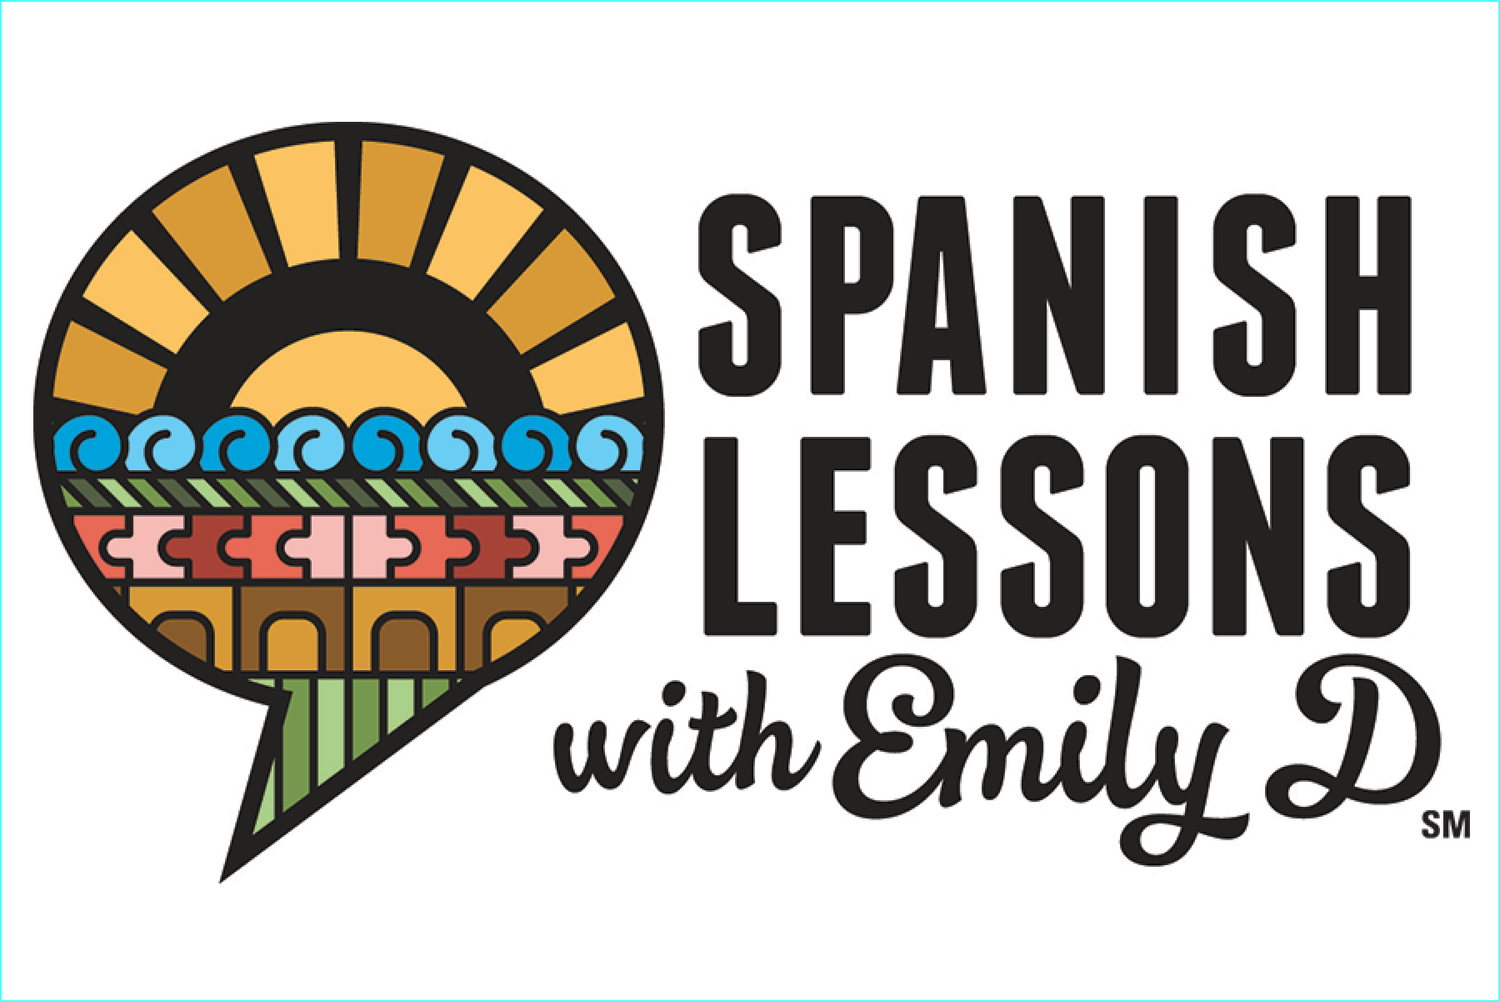 Spanish Lessons with Emily D.